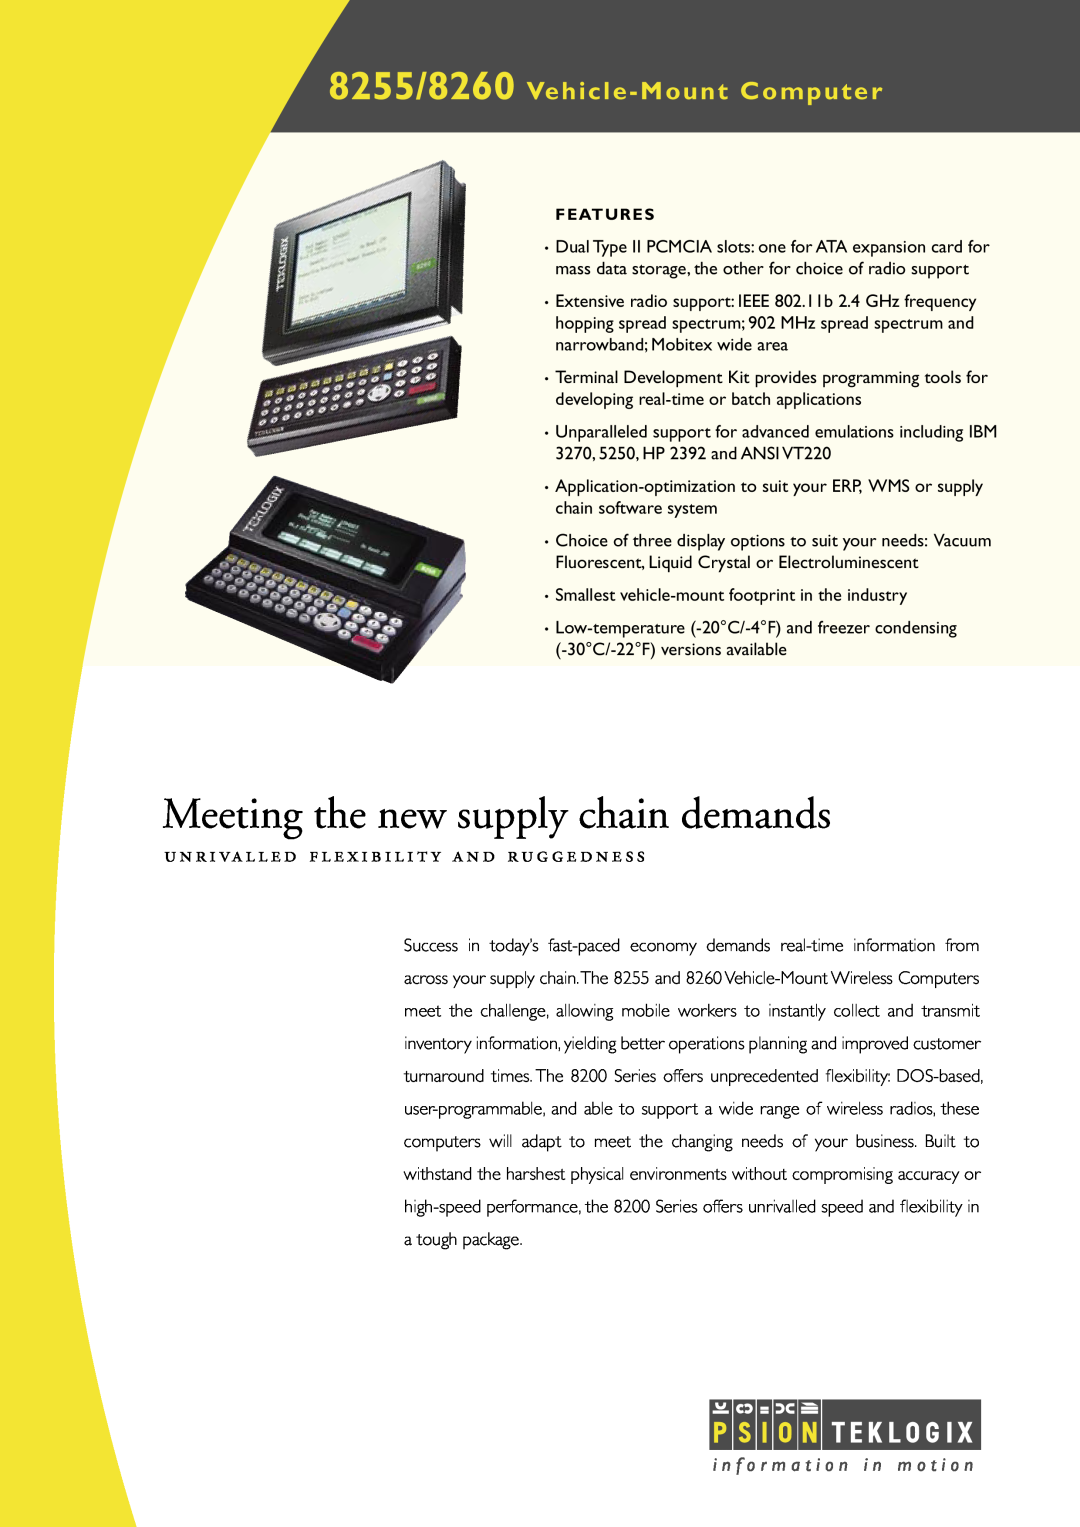 Psion Teklogix manual 8255/8260 Vehicle-Mount Computer, Meeting the new supply chain demands 